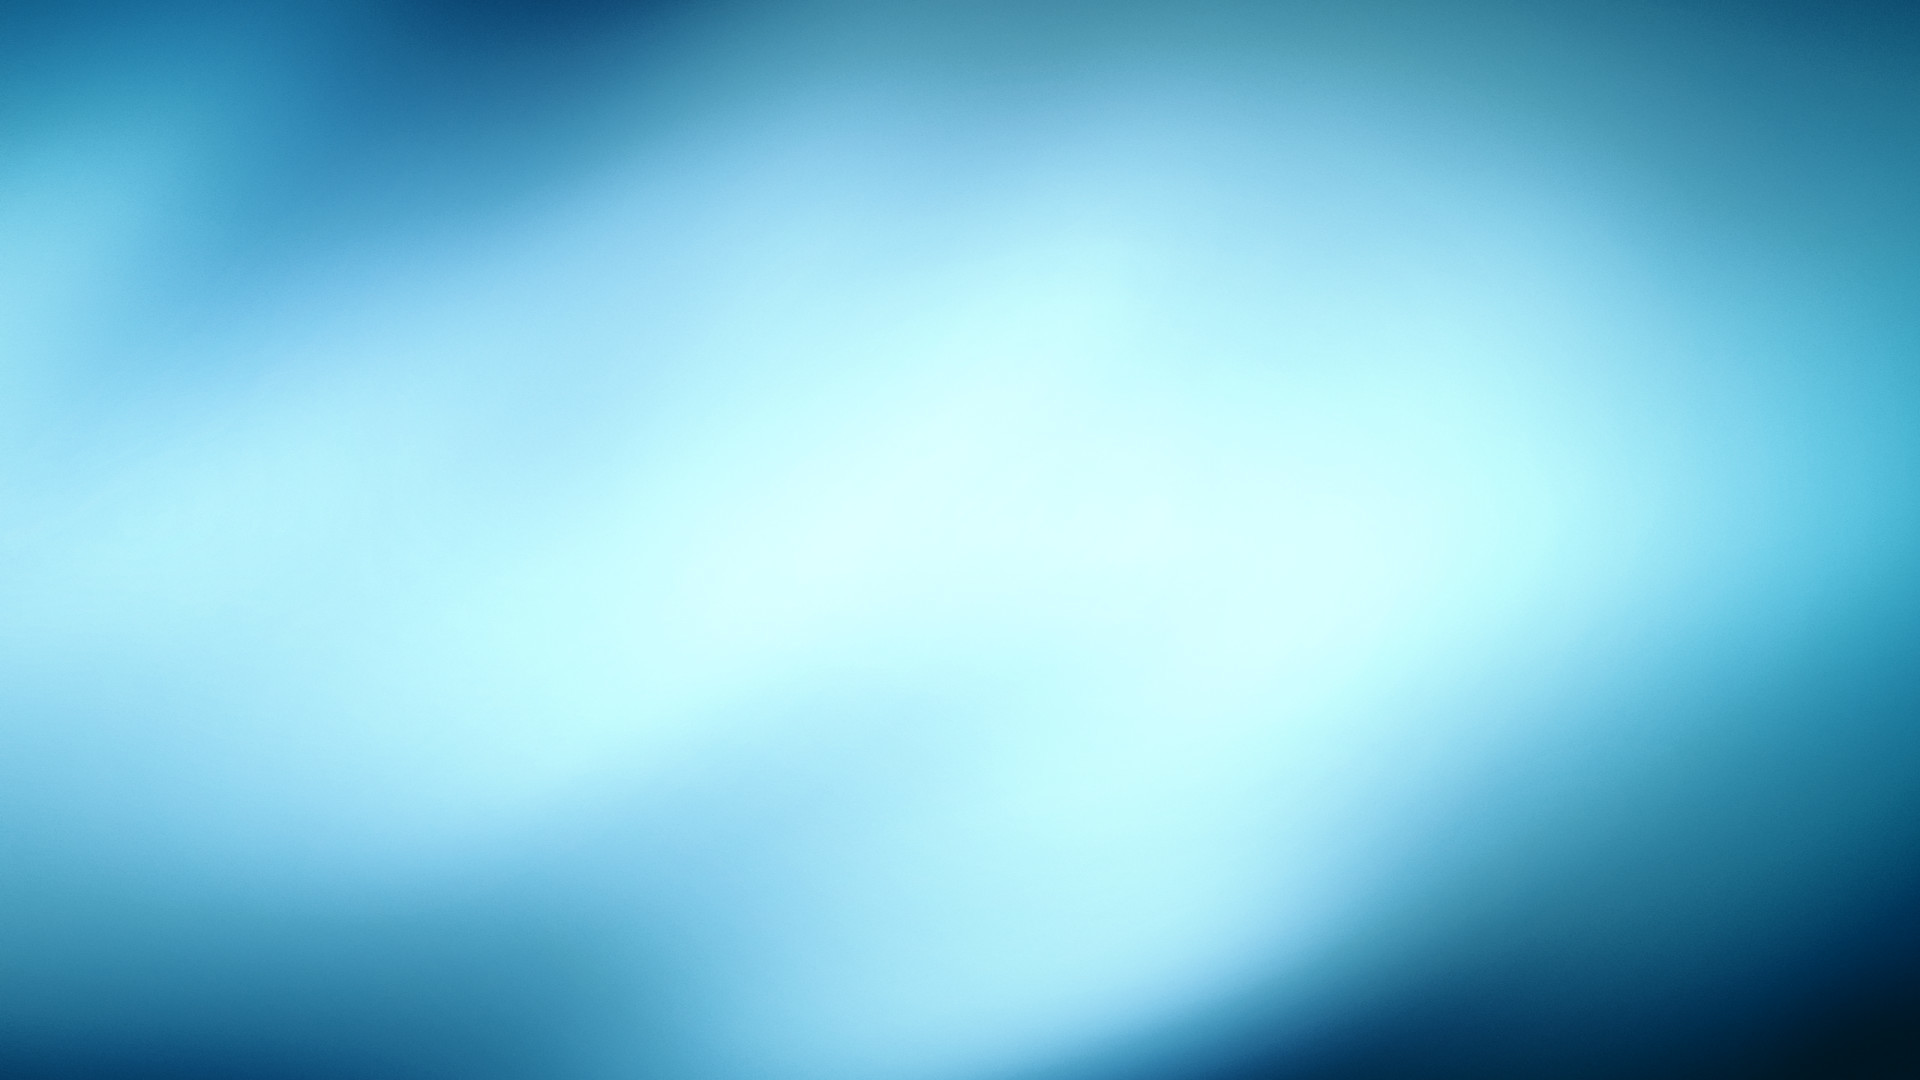 1920x1080  Wallpapers Abstract Blue Background | HD Wallpapers